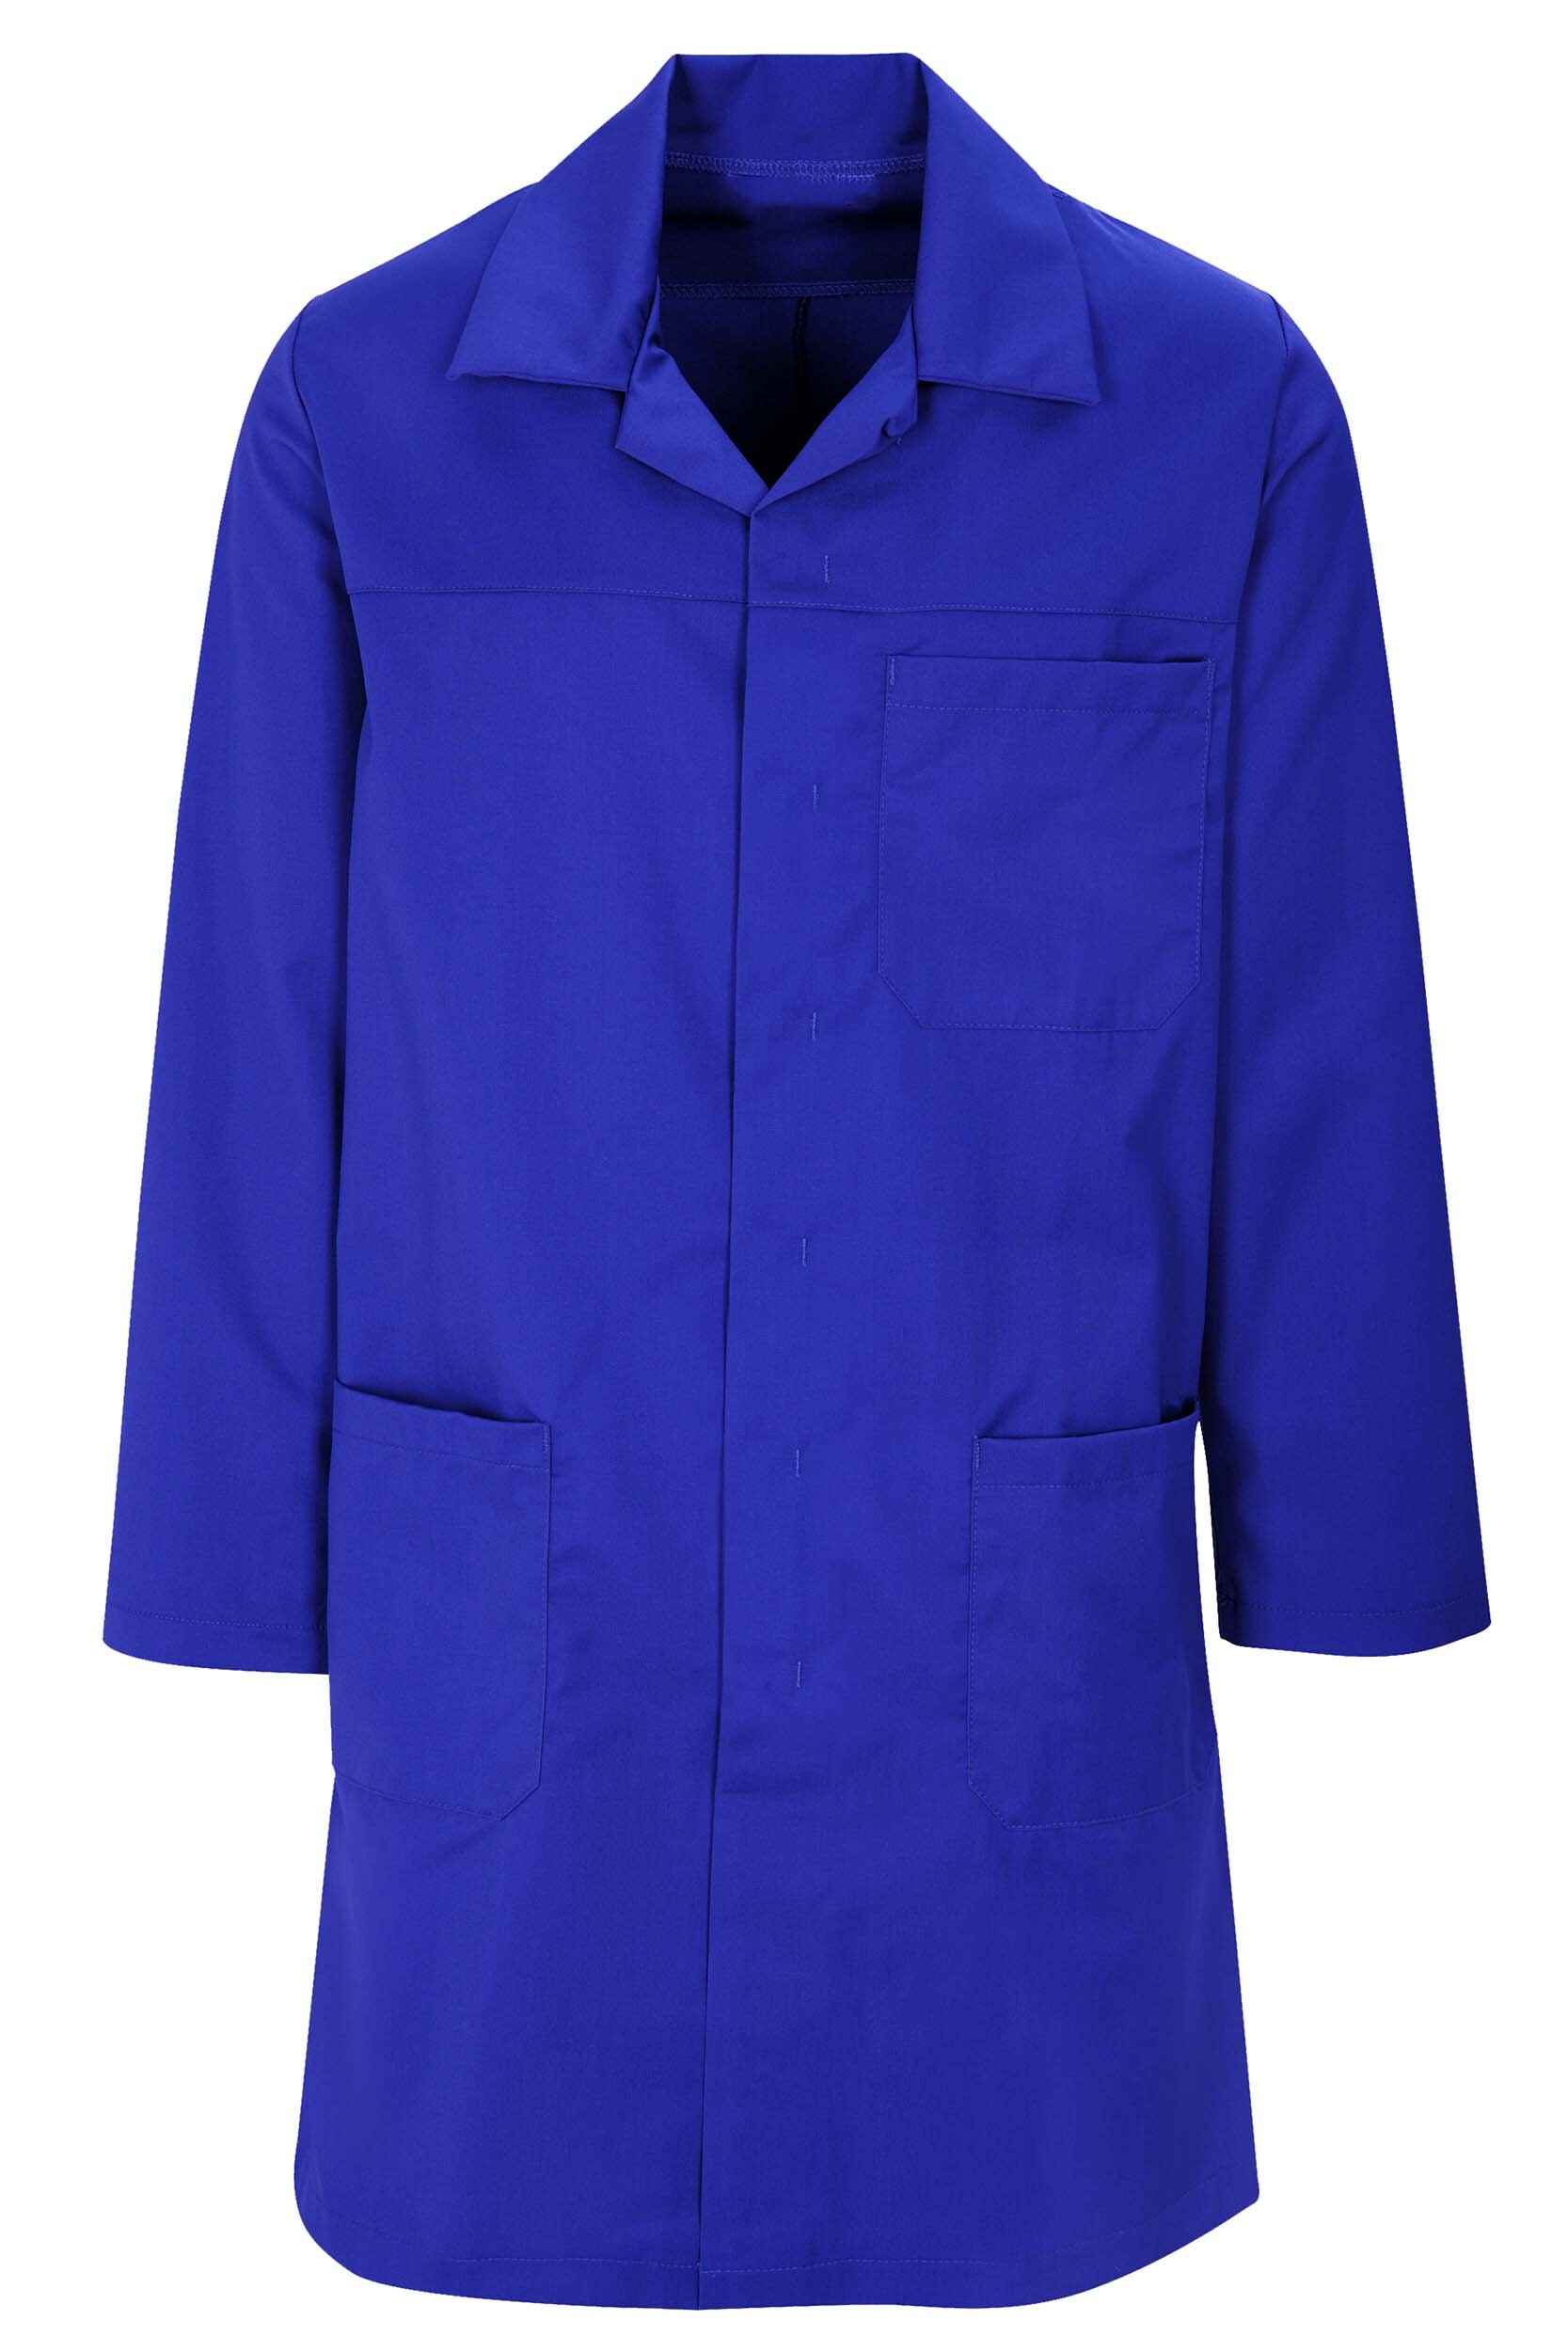 MD30_ROYAL_FRONT.jpg - Workwear Garments - CLEAN Services